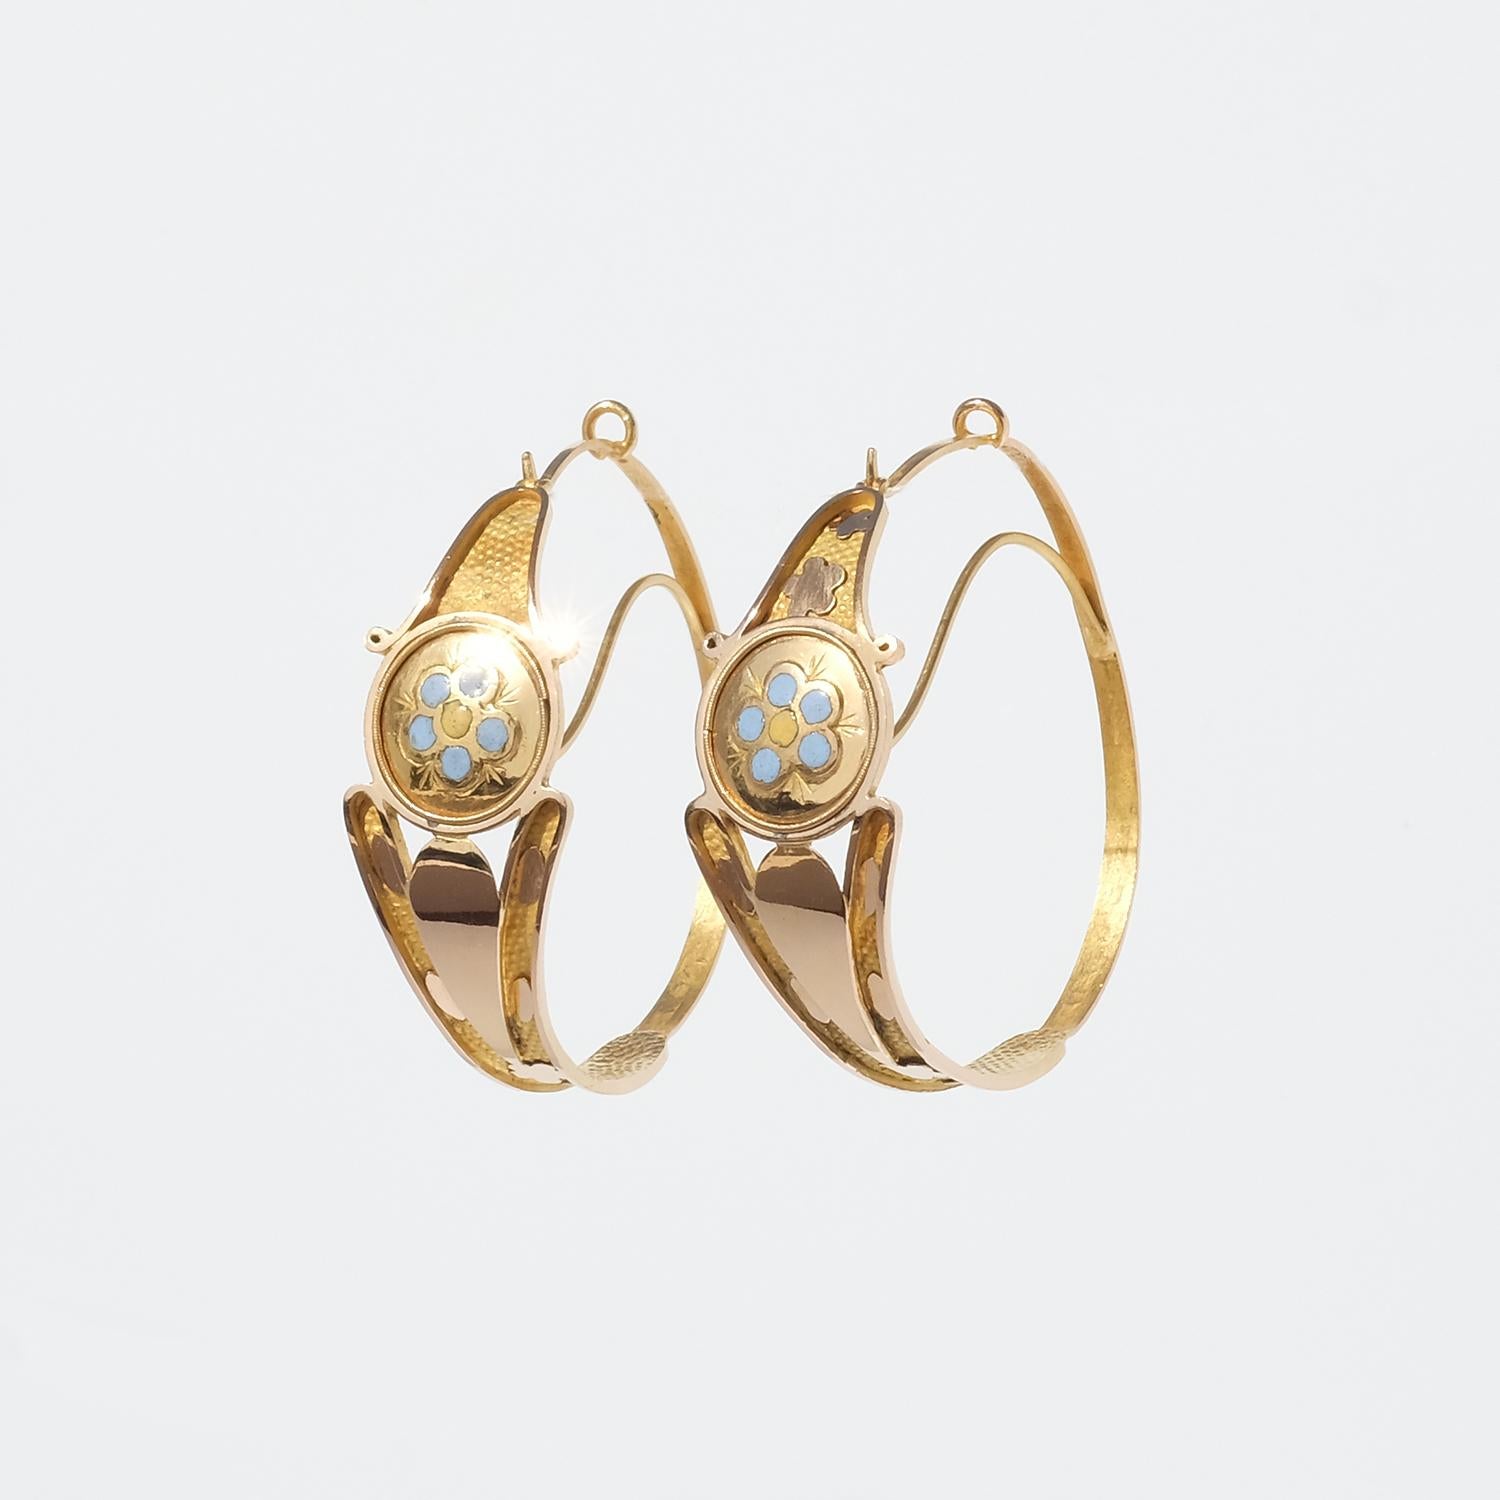 Pair of 18 K Gold Earrings Made Year 1820 4